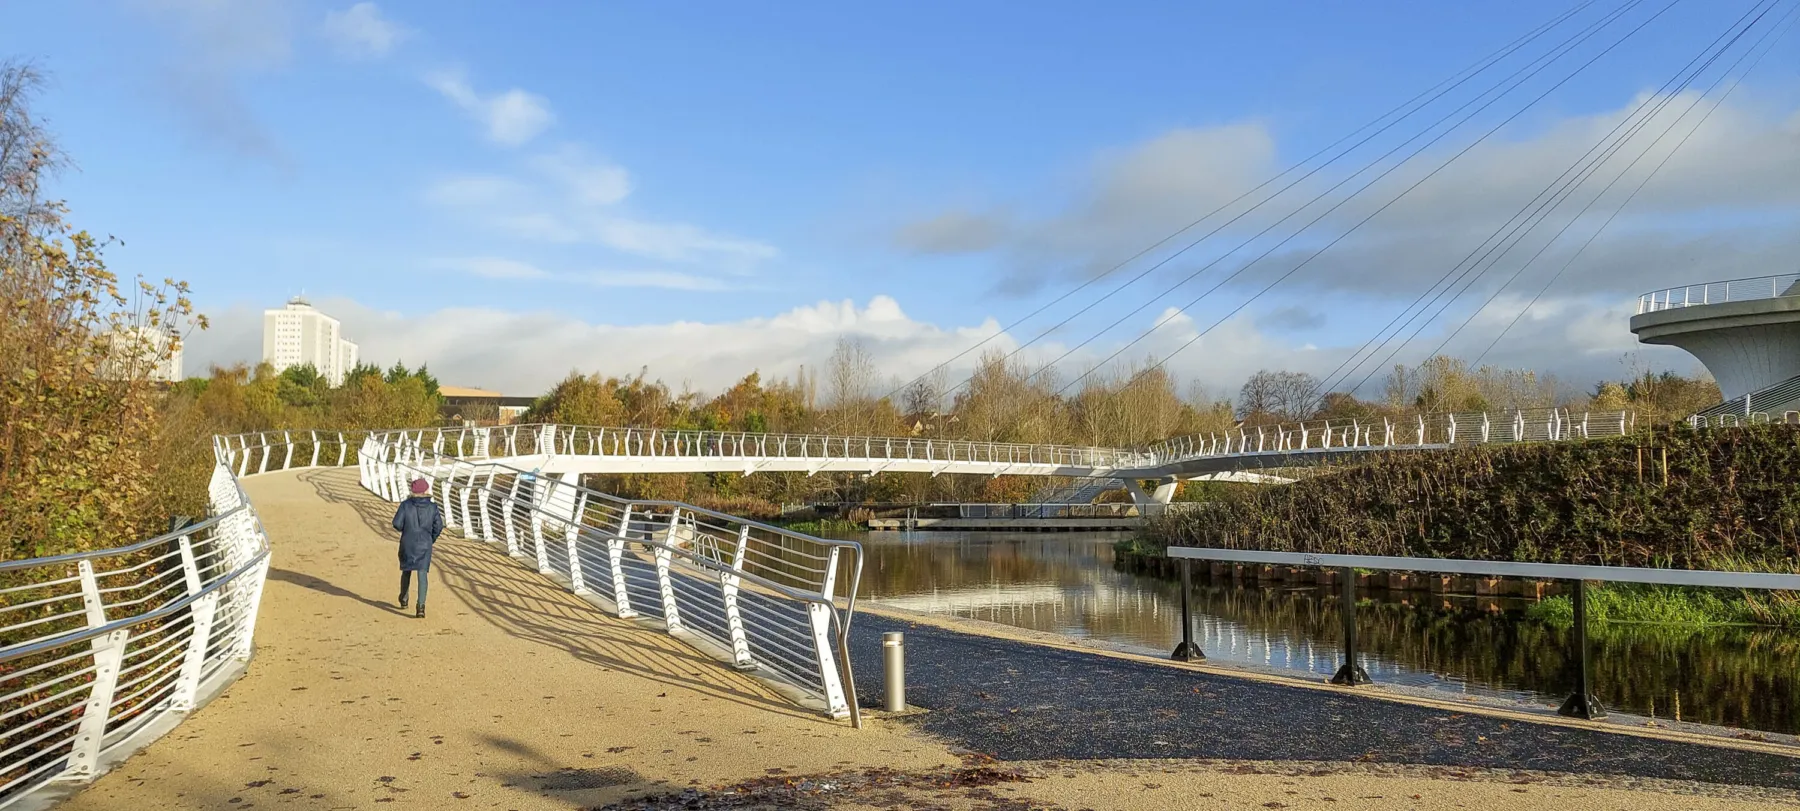 A view of one of the entrances to the Stockingfield Bridge. A wide path suitable for pedestrians, cyclists and those with accessibility needs has a non slip surface and white railings.